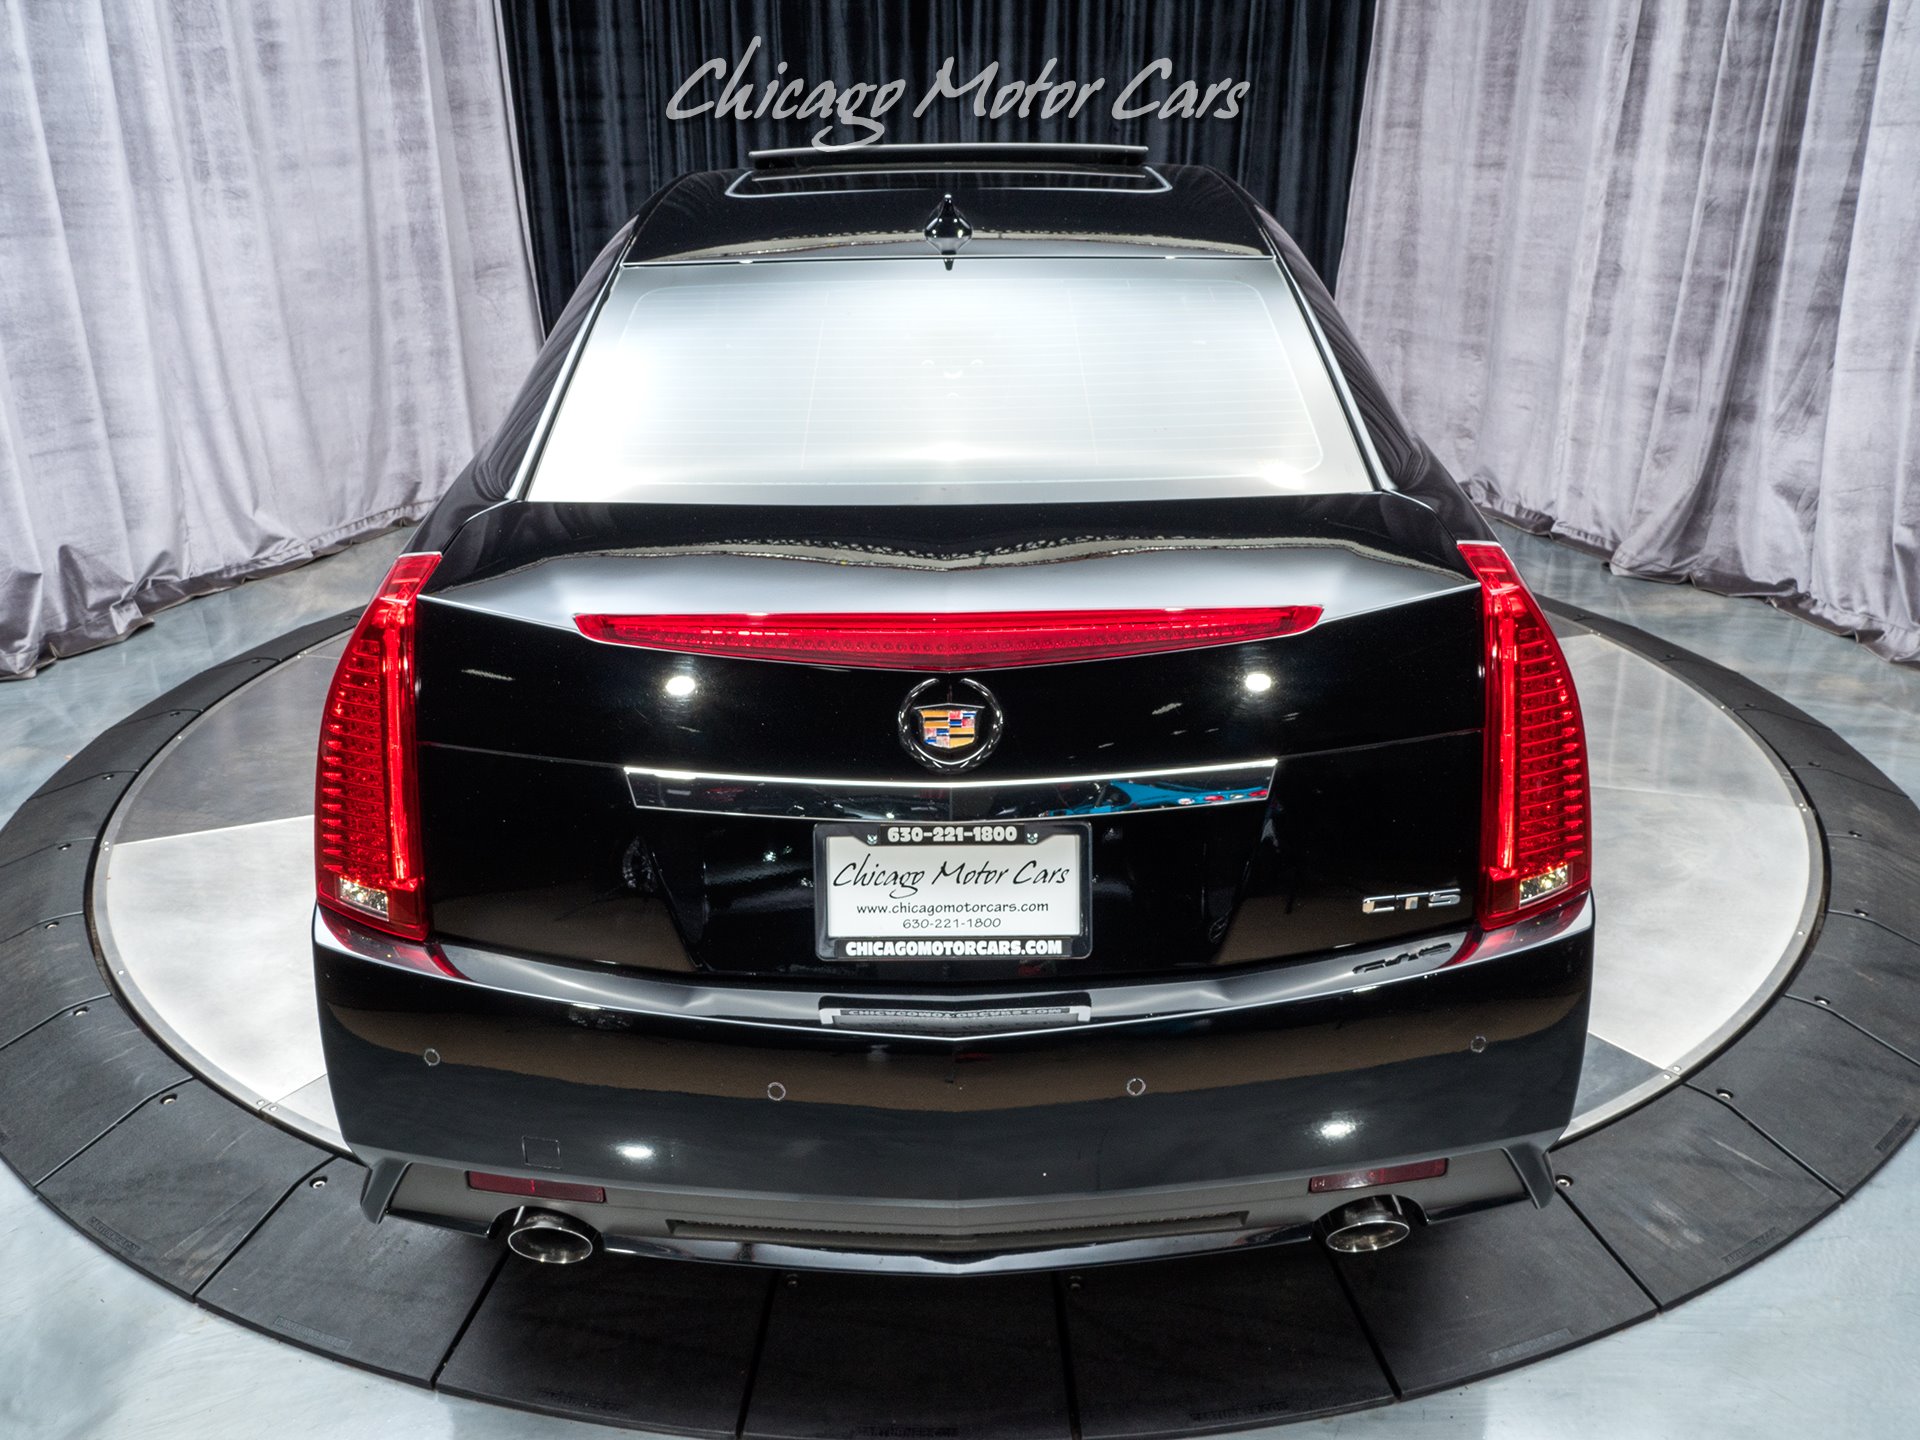 Used-2010-Cadillac-CTS-V-Sedan-with-Corsa-Exhaust